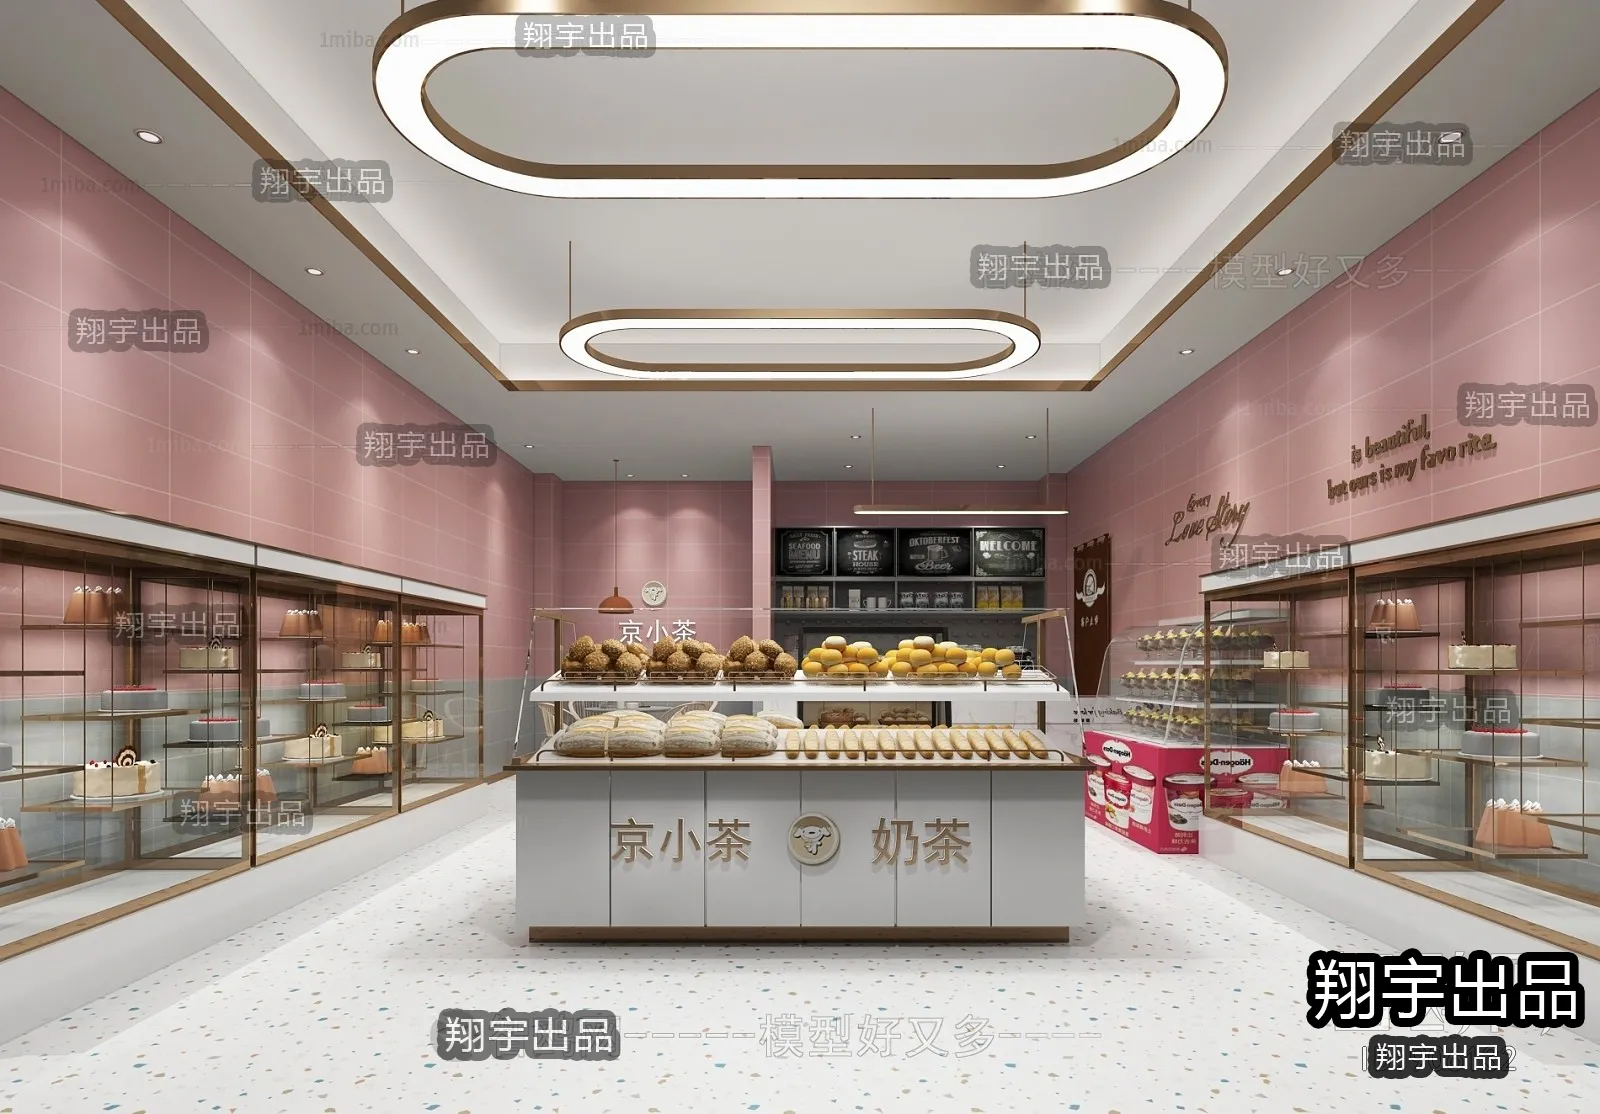 FASTFOOD STORE – 3D SCENES – 0130